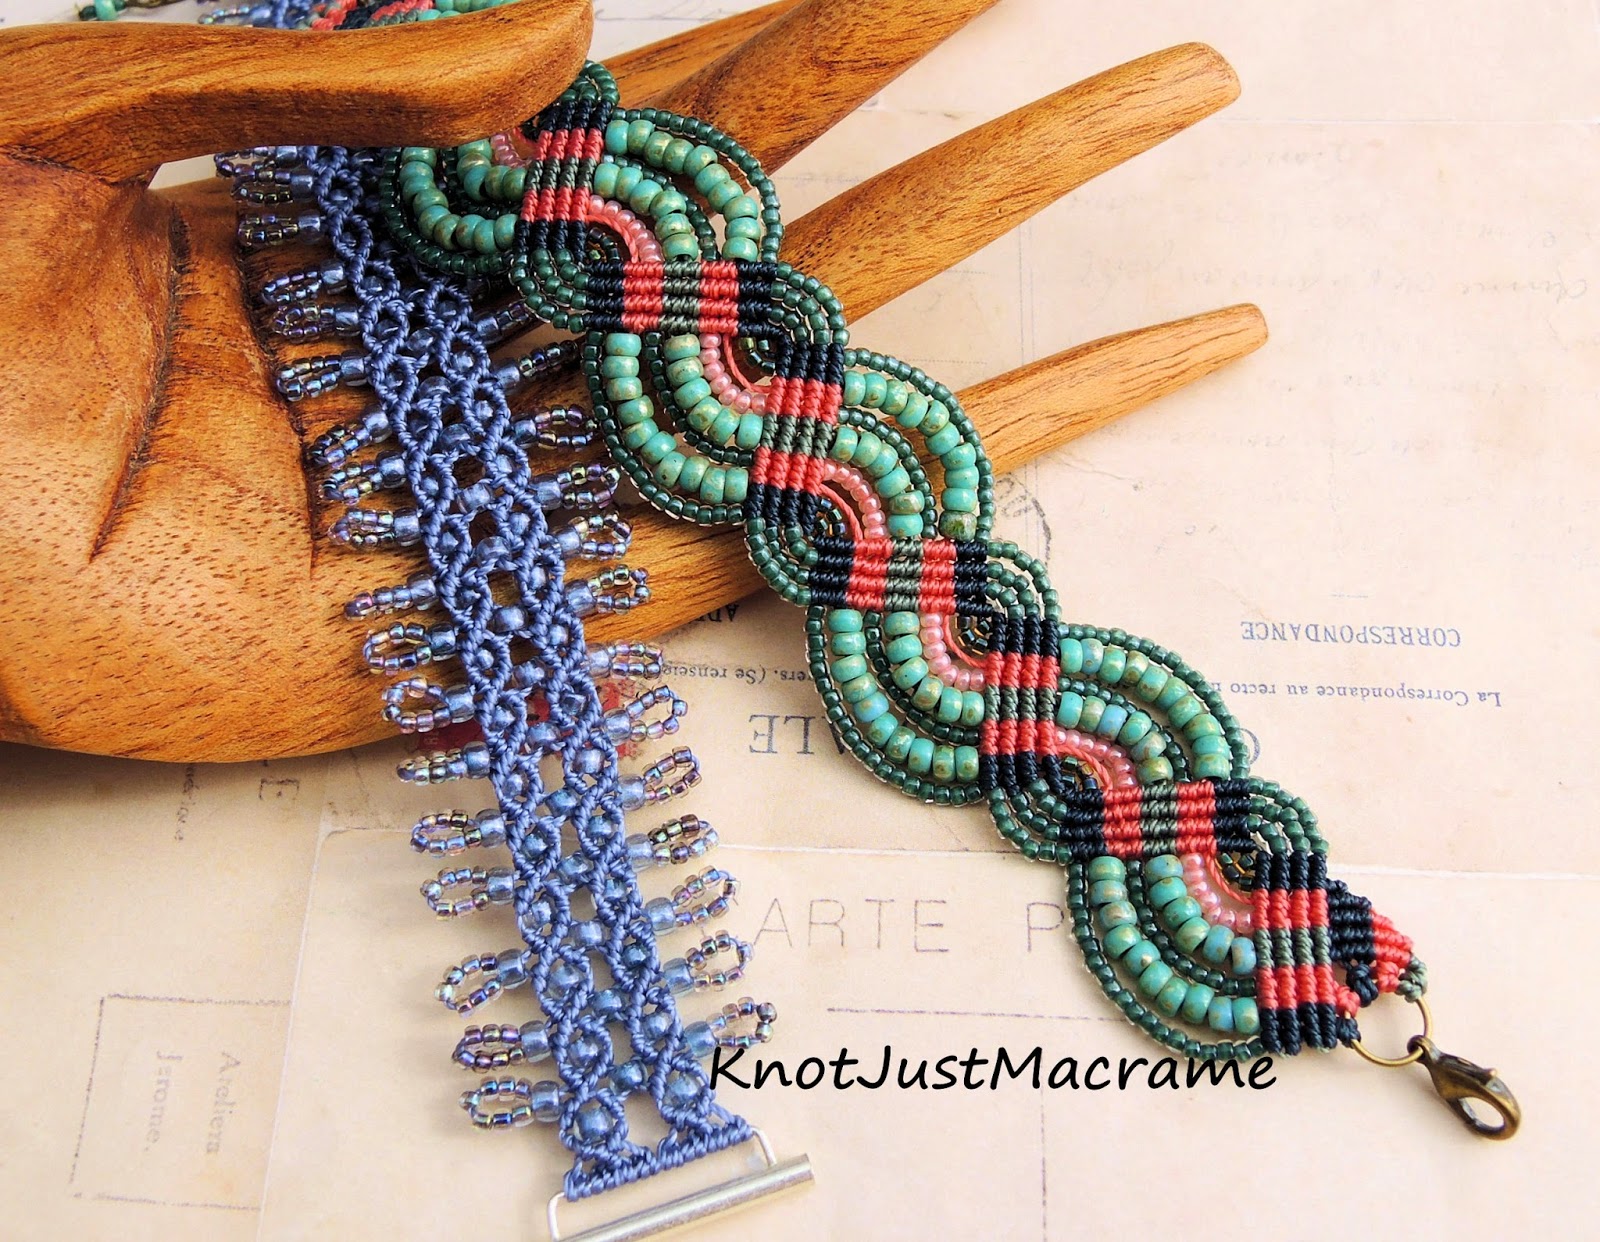 Two micro macrame bracelets from Knot Just Macrame